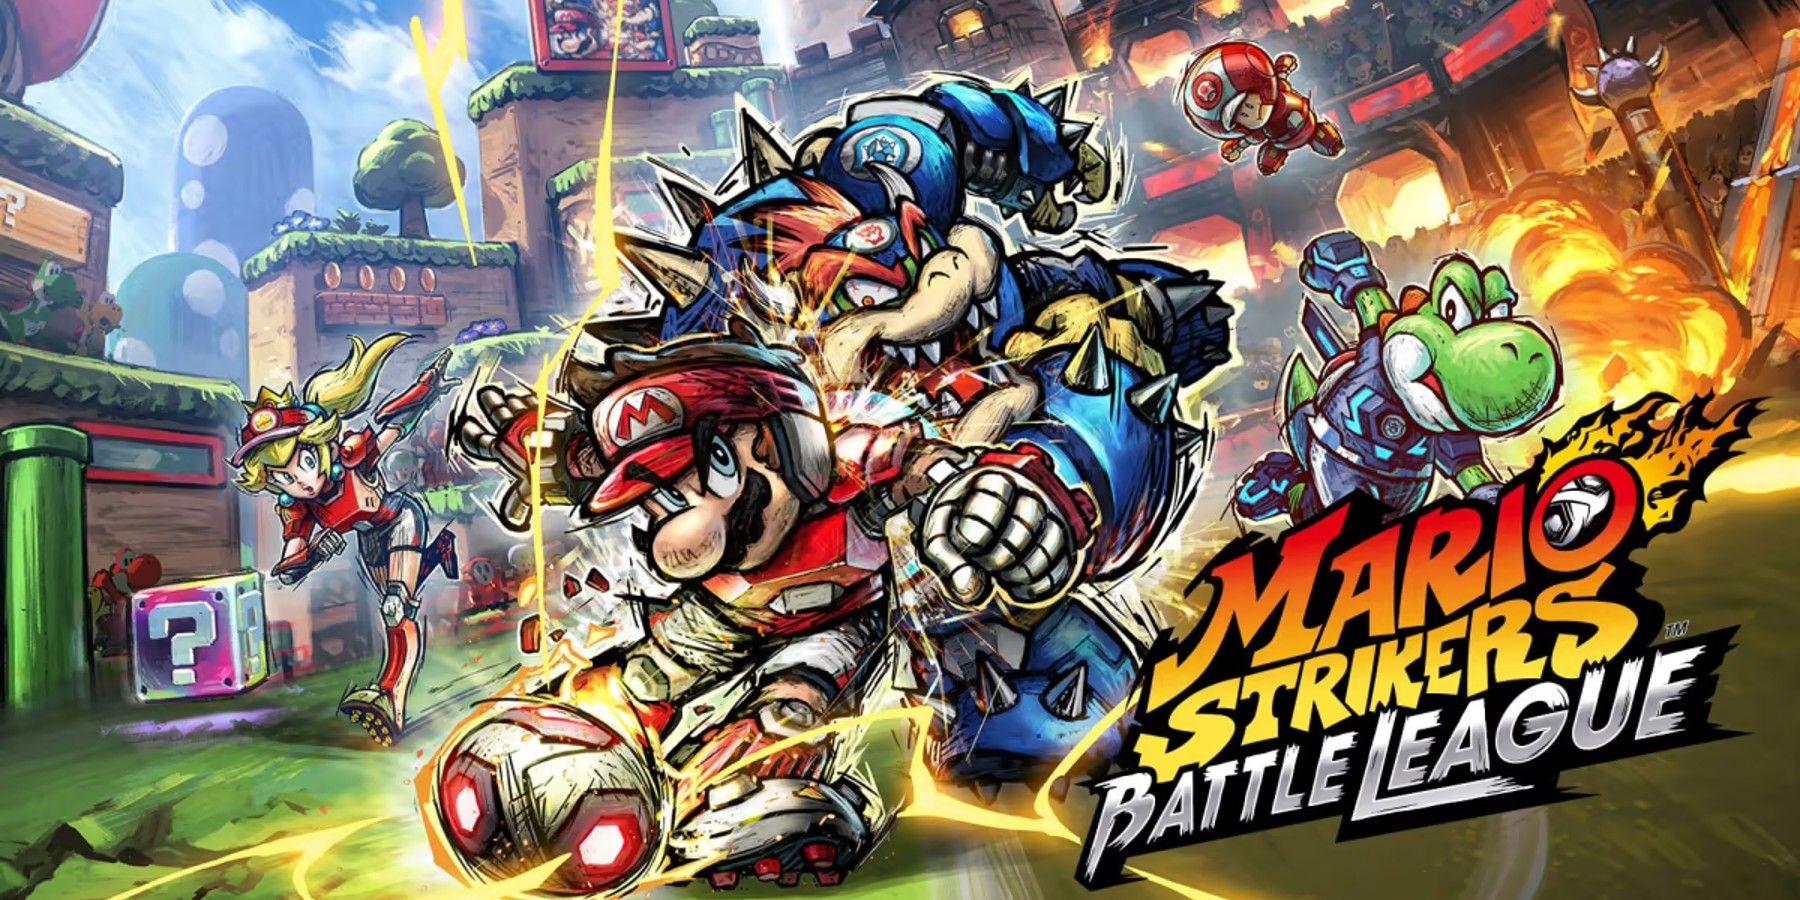 Mario Strikers Battle League Reveals New Trailers Focused on Customization, Hyper Strikes, and More